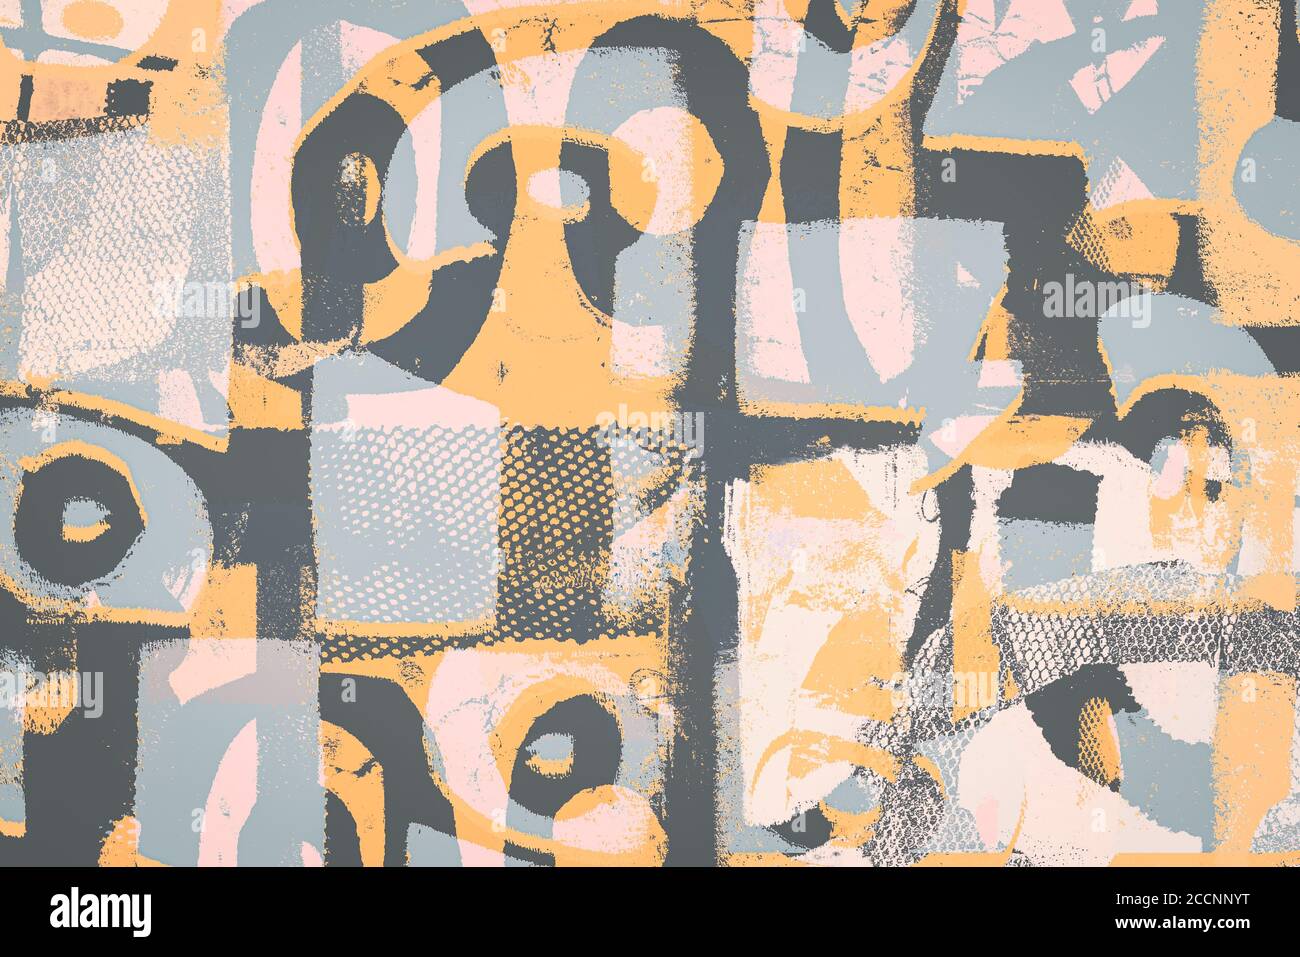 Mixed media creative background made of textured geometric shapes in grey-yellow tones Stock Photo